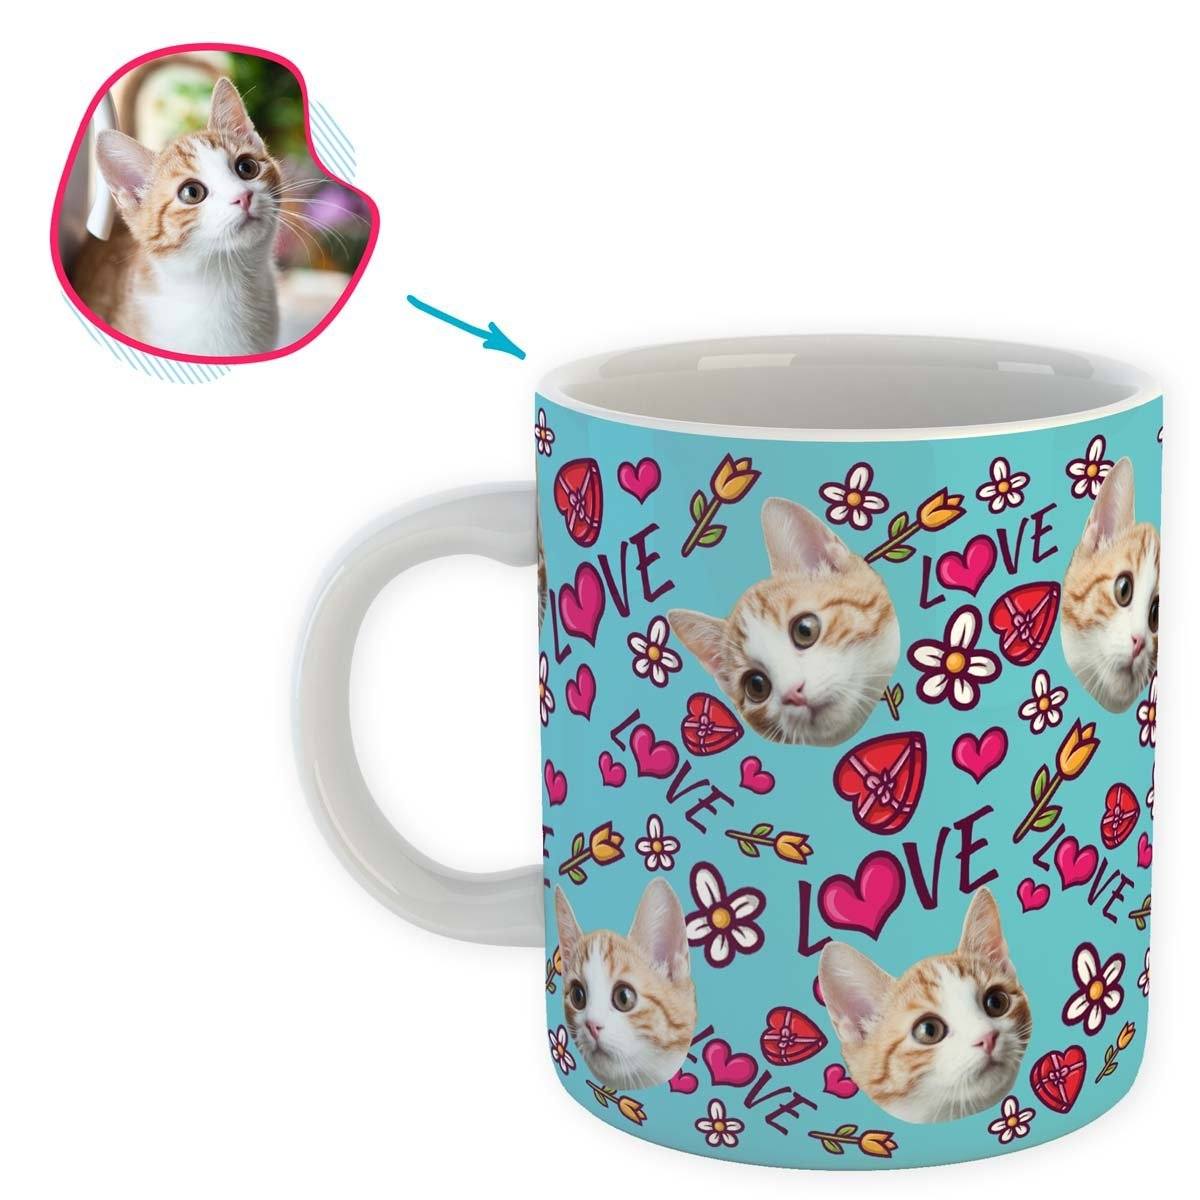 blue Hearts and Flowers mug personalized with photo of face printed on it